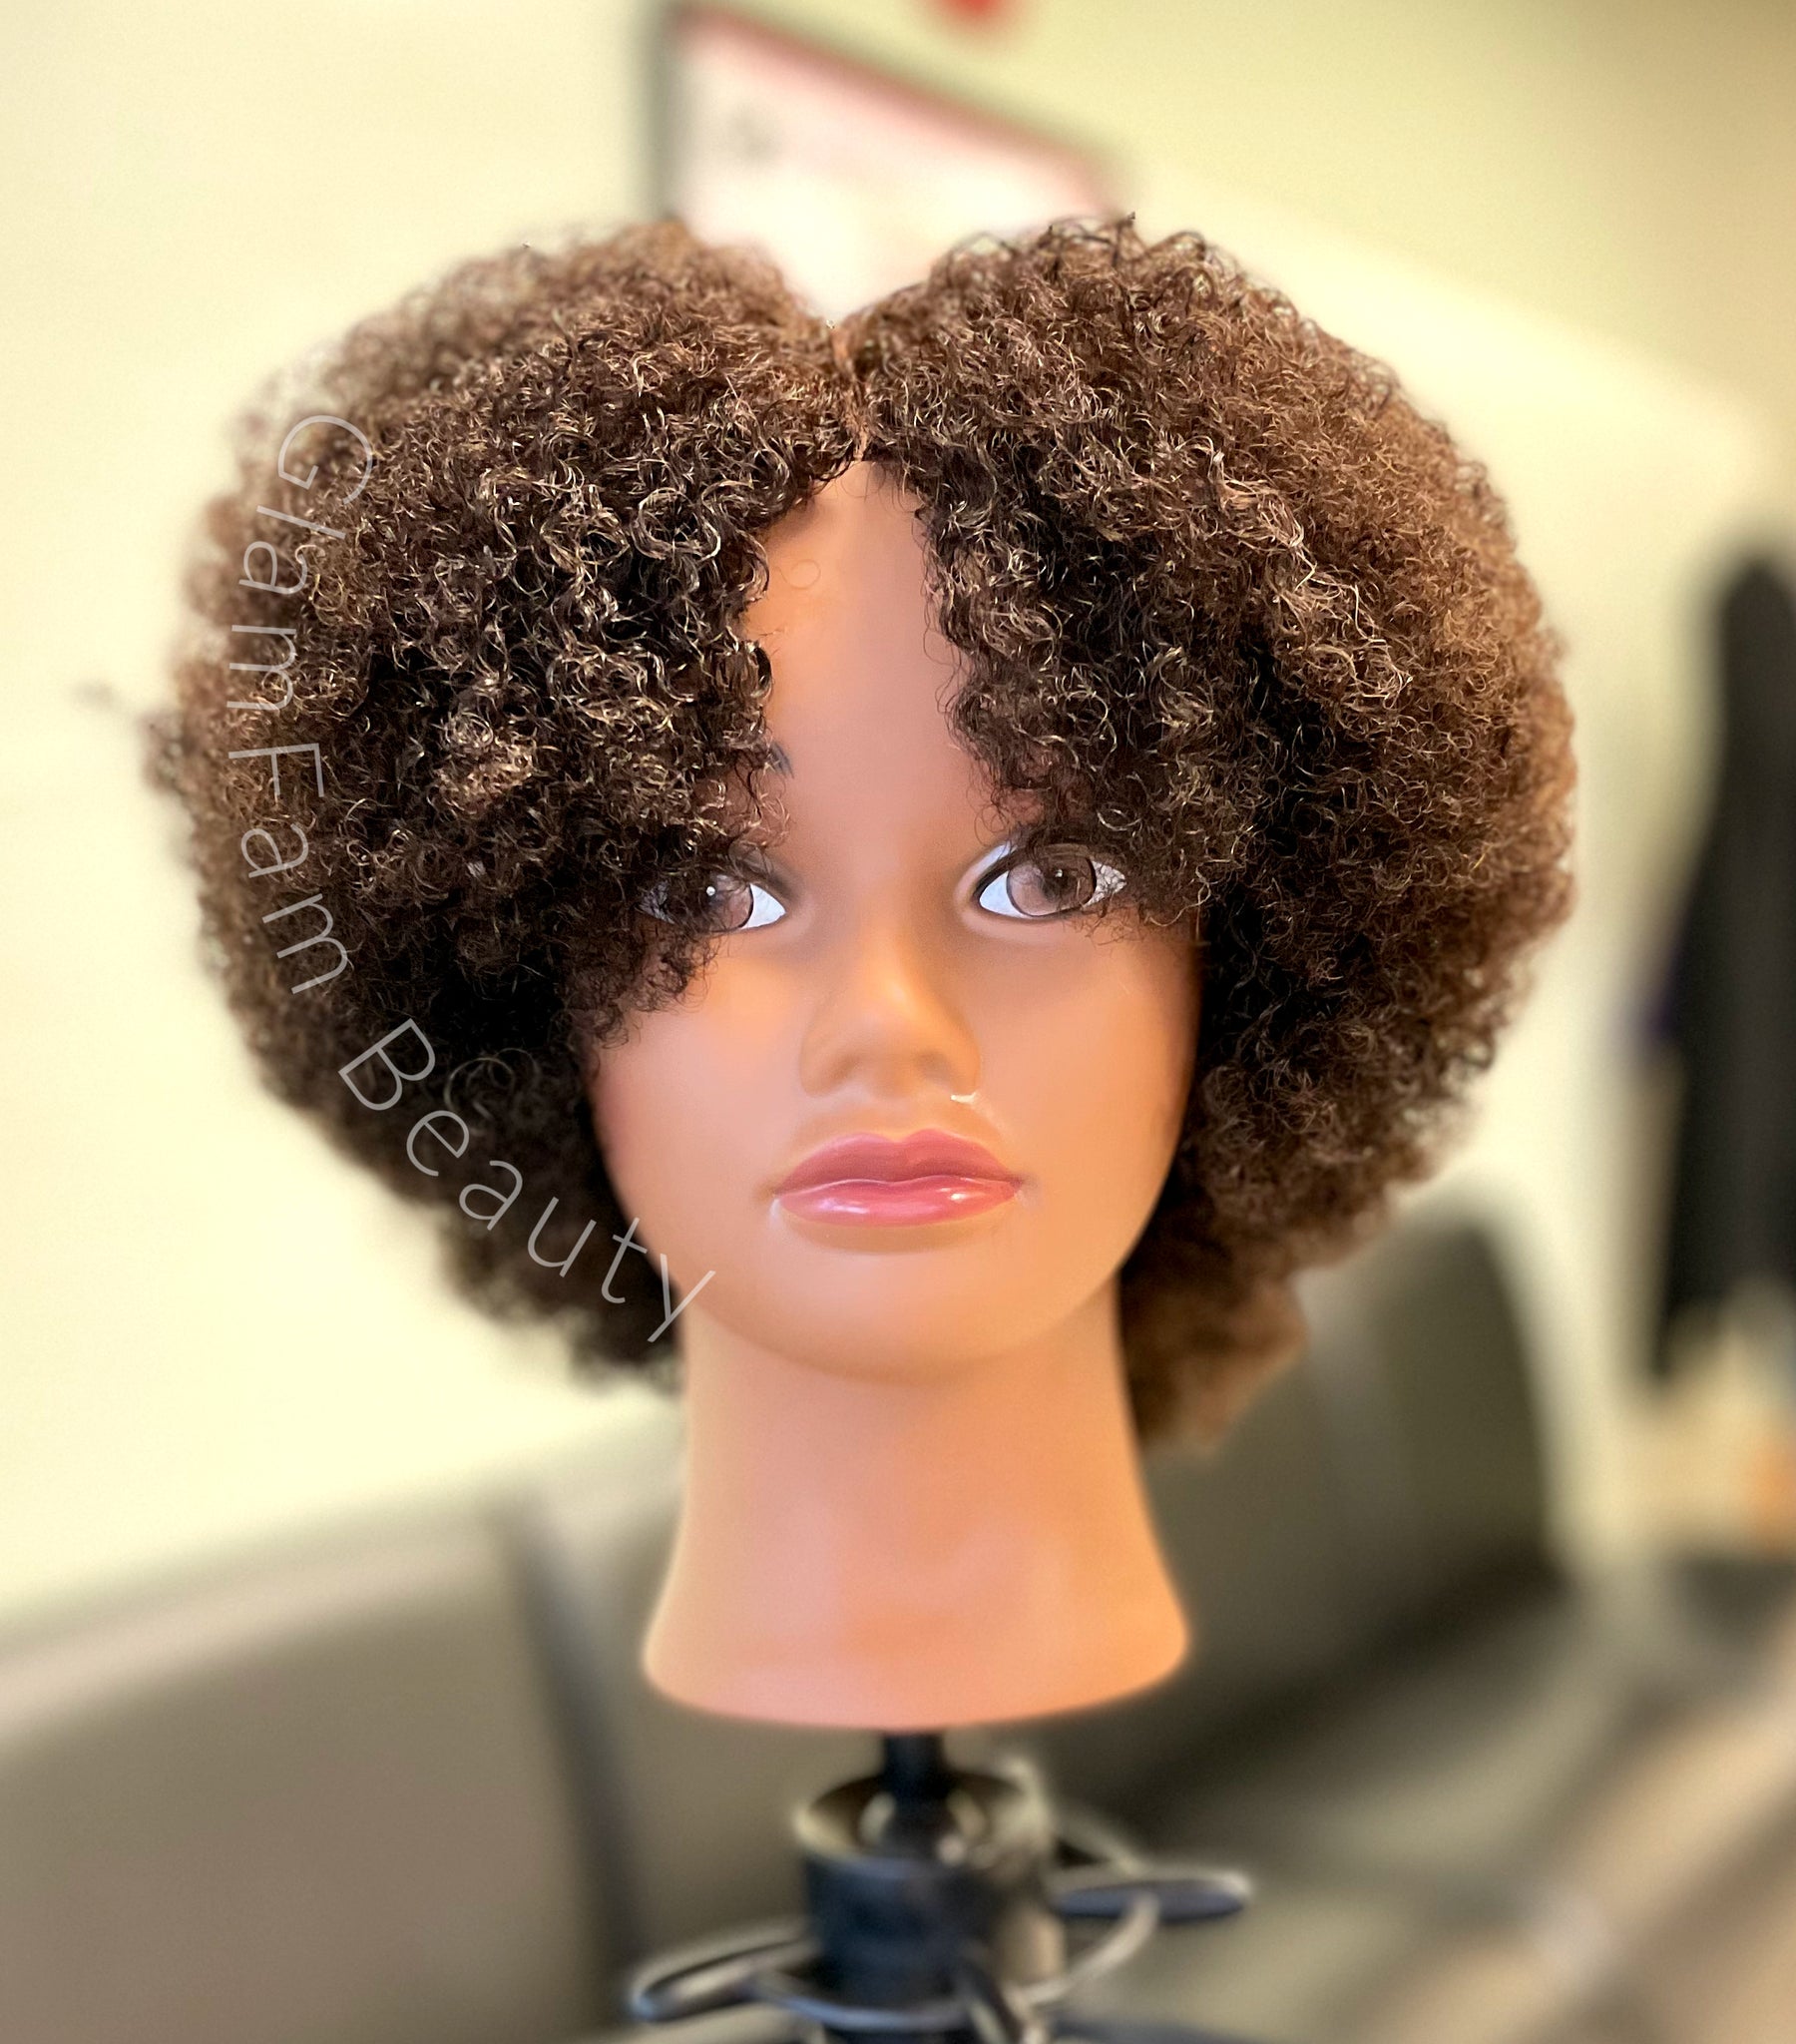 100% Human Hair 8 Afro Mannequin Head (With Stand)